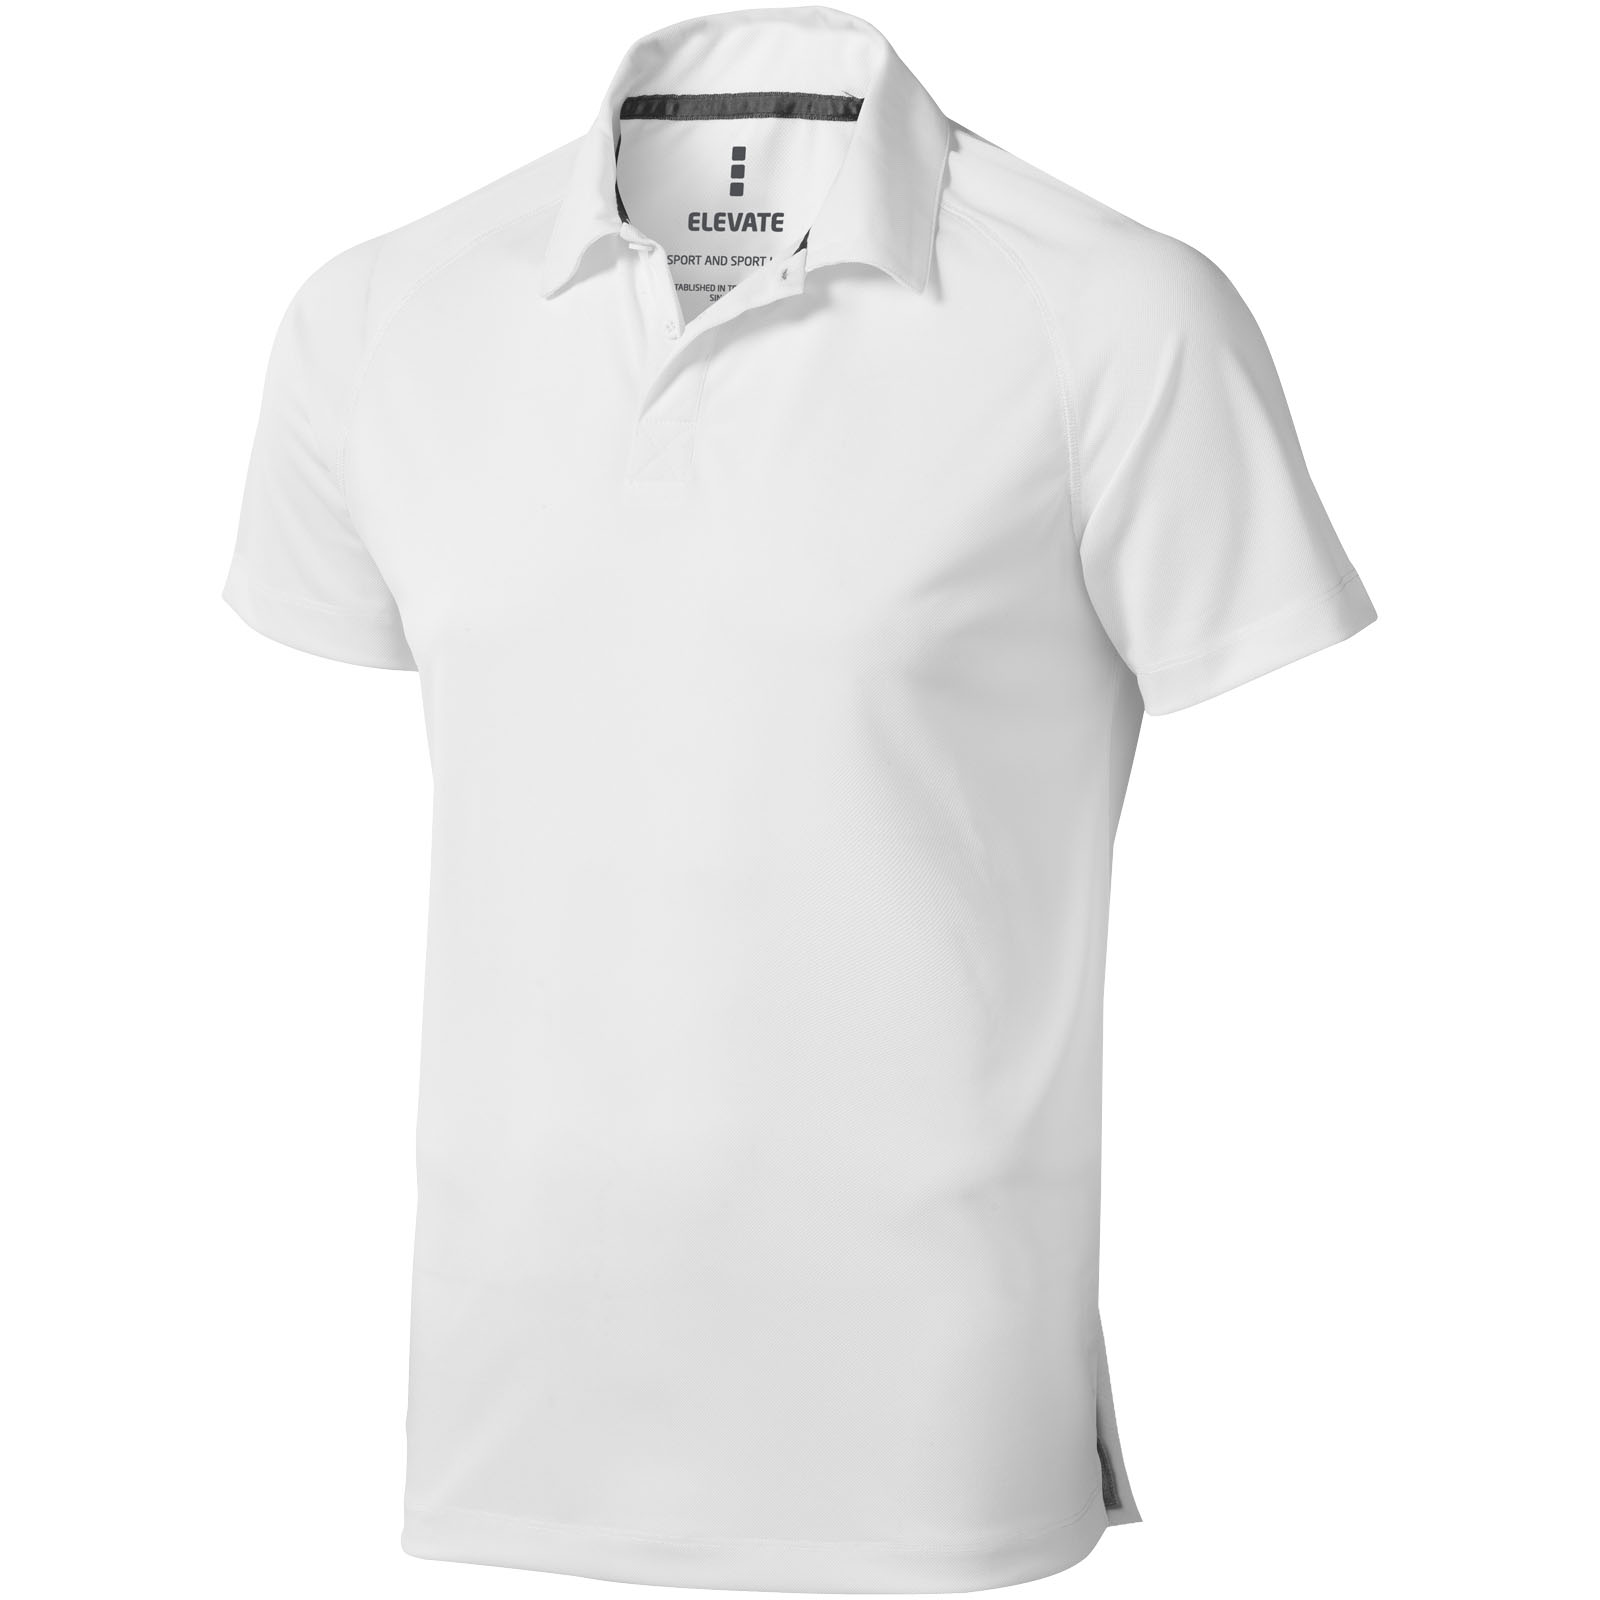 Advertising Polos - Ottawa short sleeve men's cool fit polo